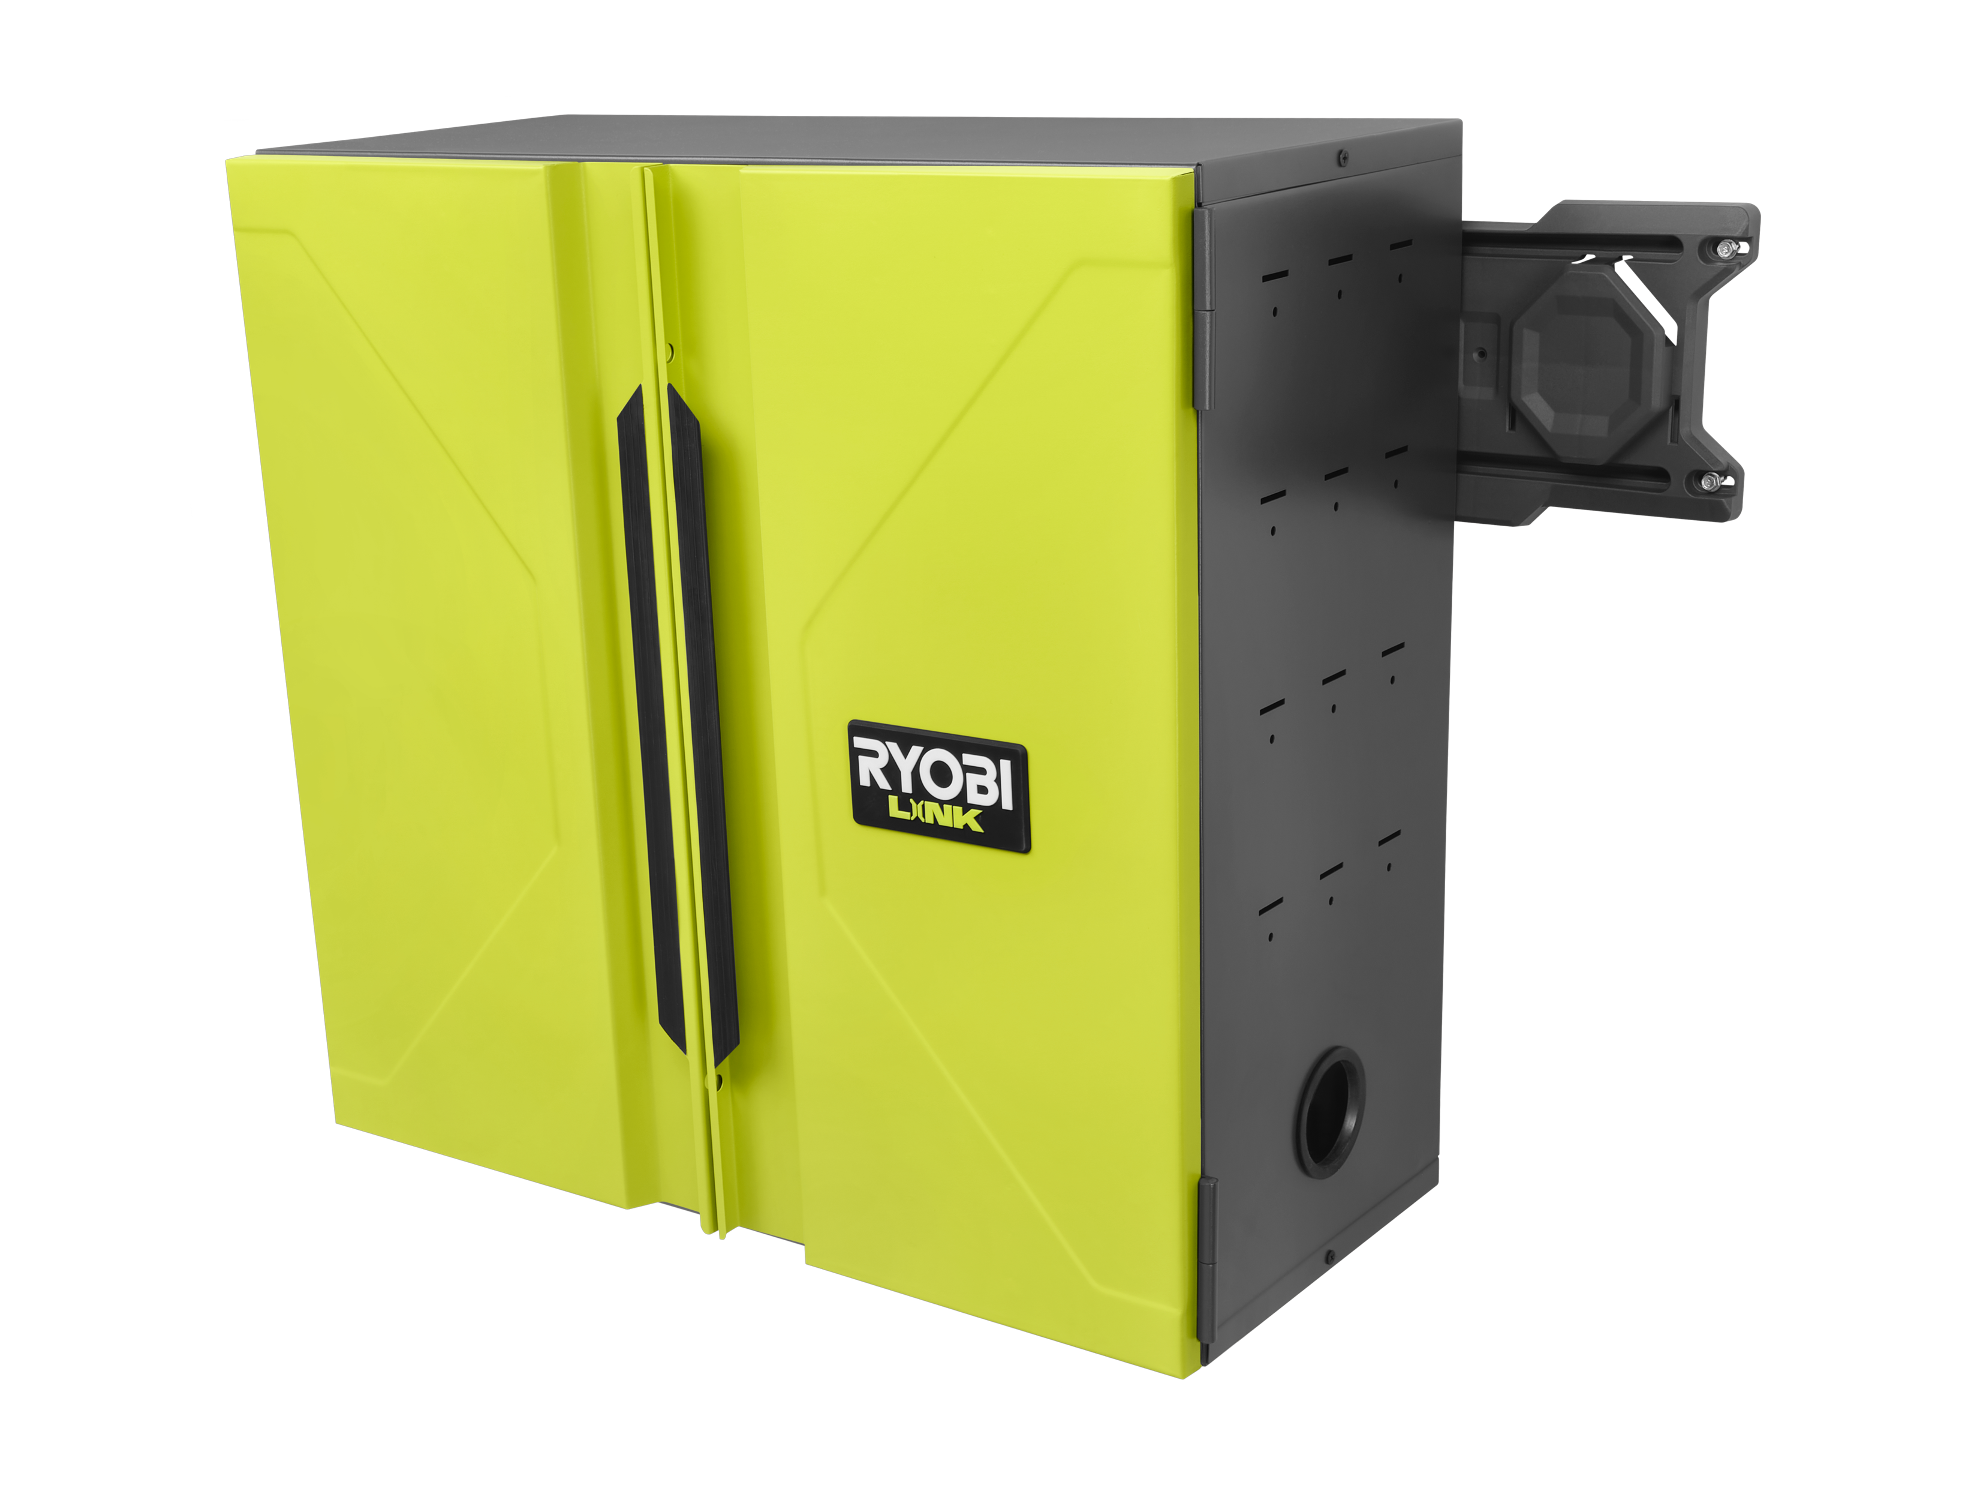 How To Install Your Ryobi Link System